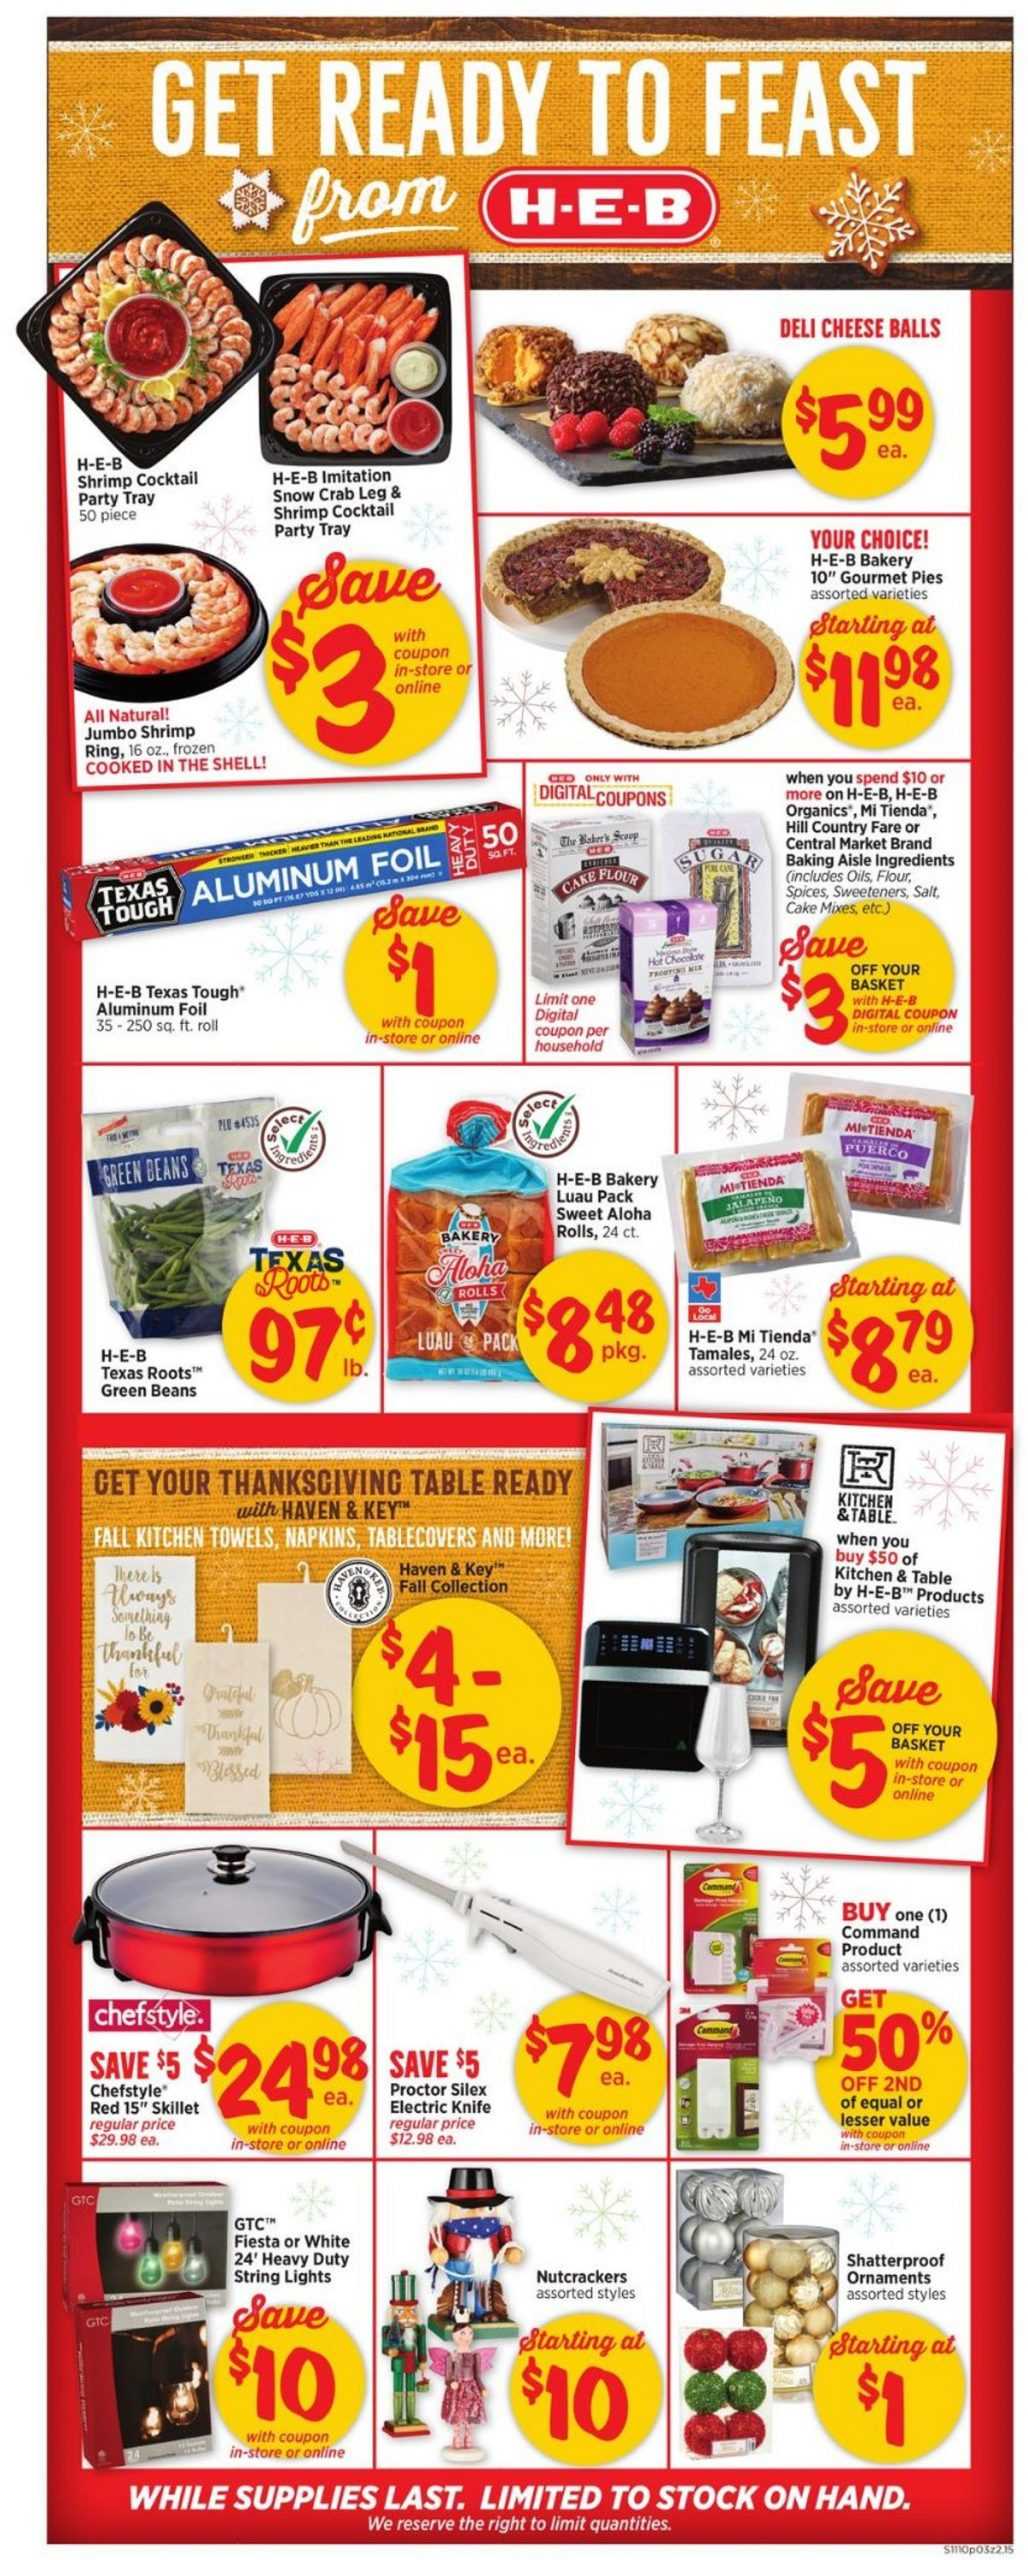 HEB Weekly Ad February 23 - March 1, 2022